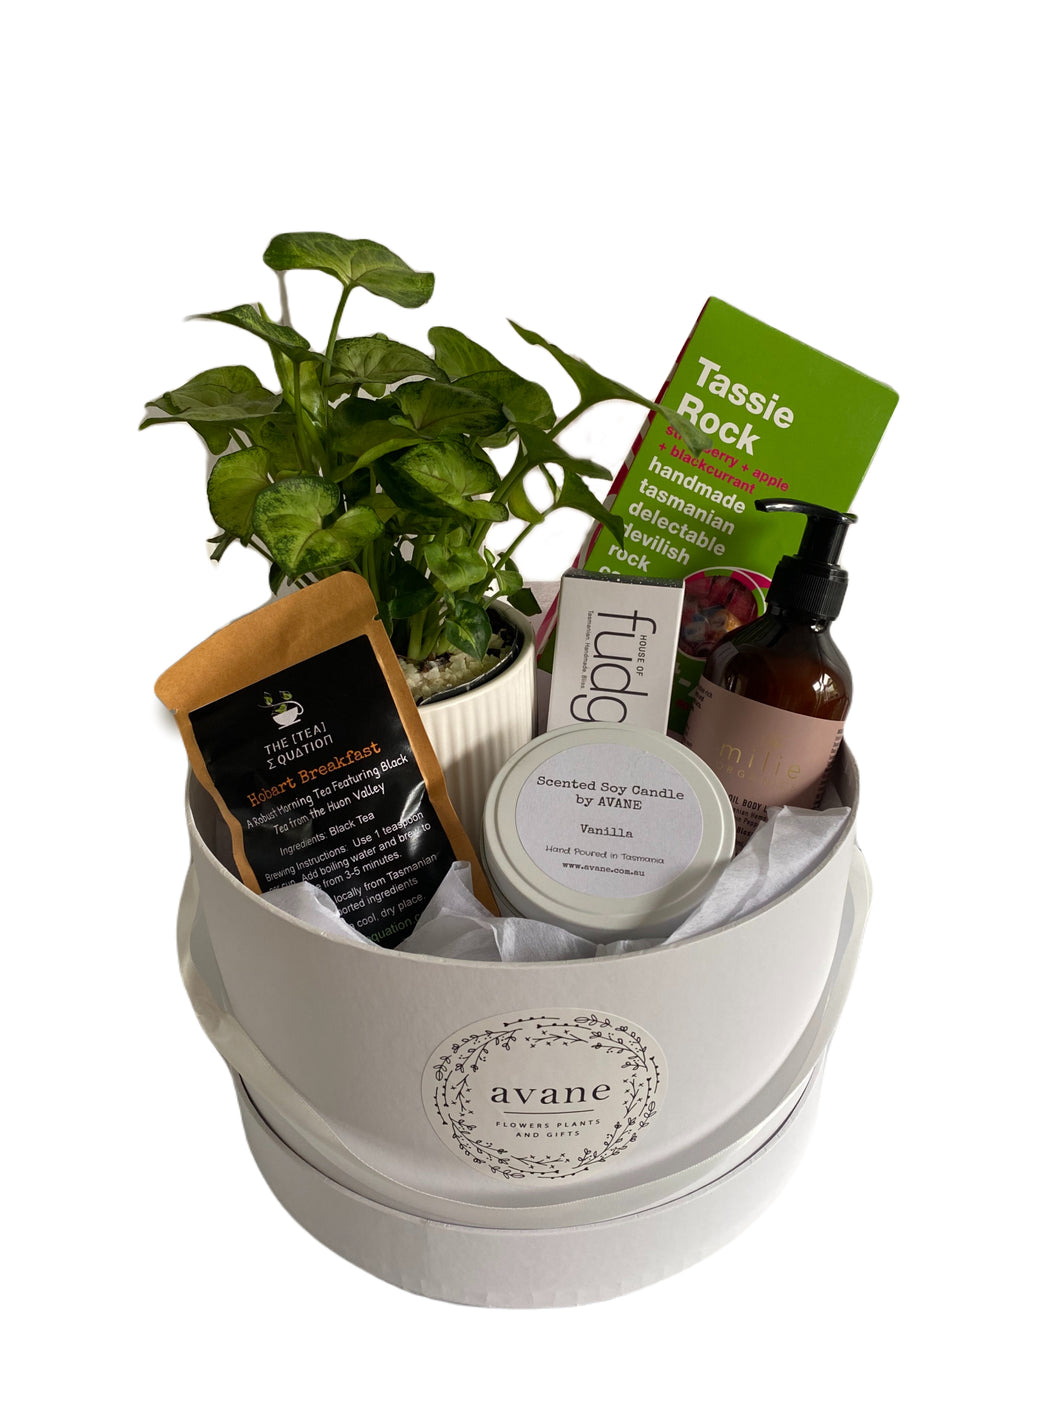 What a great gift! A easy to care for indoor plant in a ceramic pot and a selection of Tasmanian goodies, including a hand poured Vanilla soy candle, Tasmanian devil fudge, Tassie Rocks Candy, 